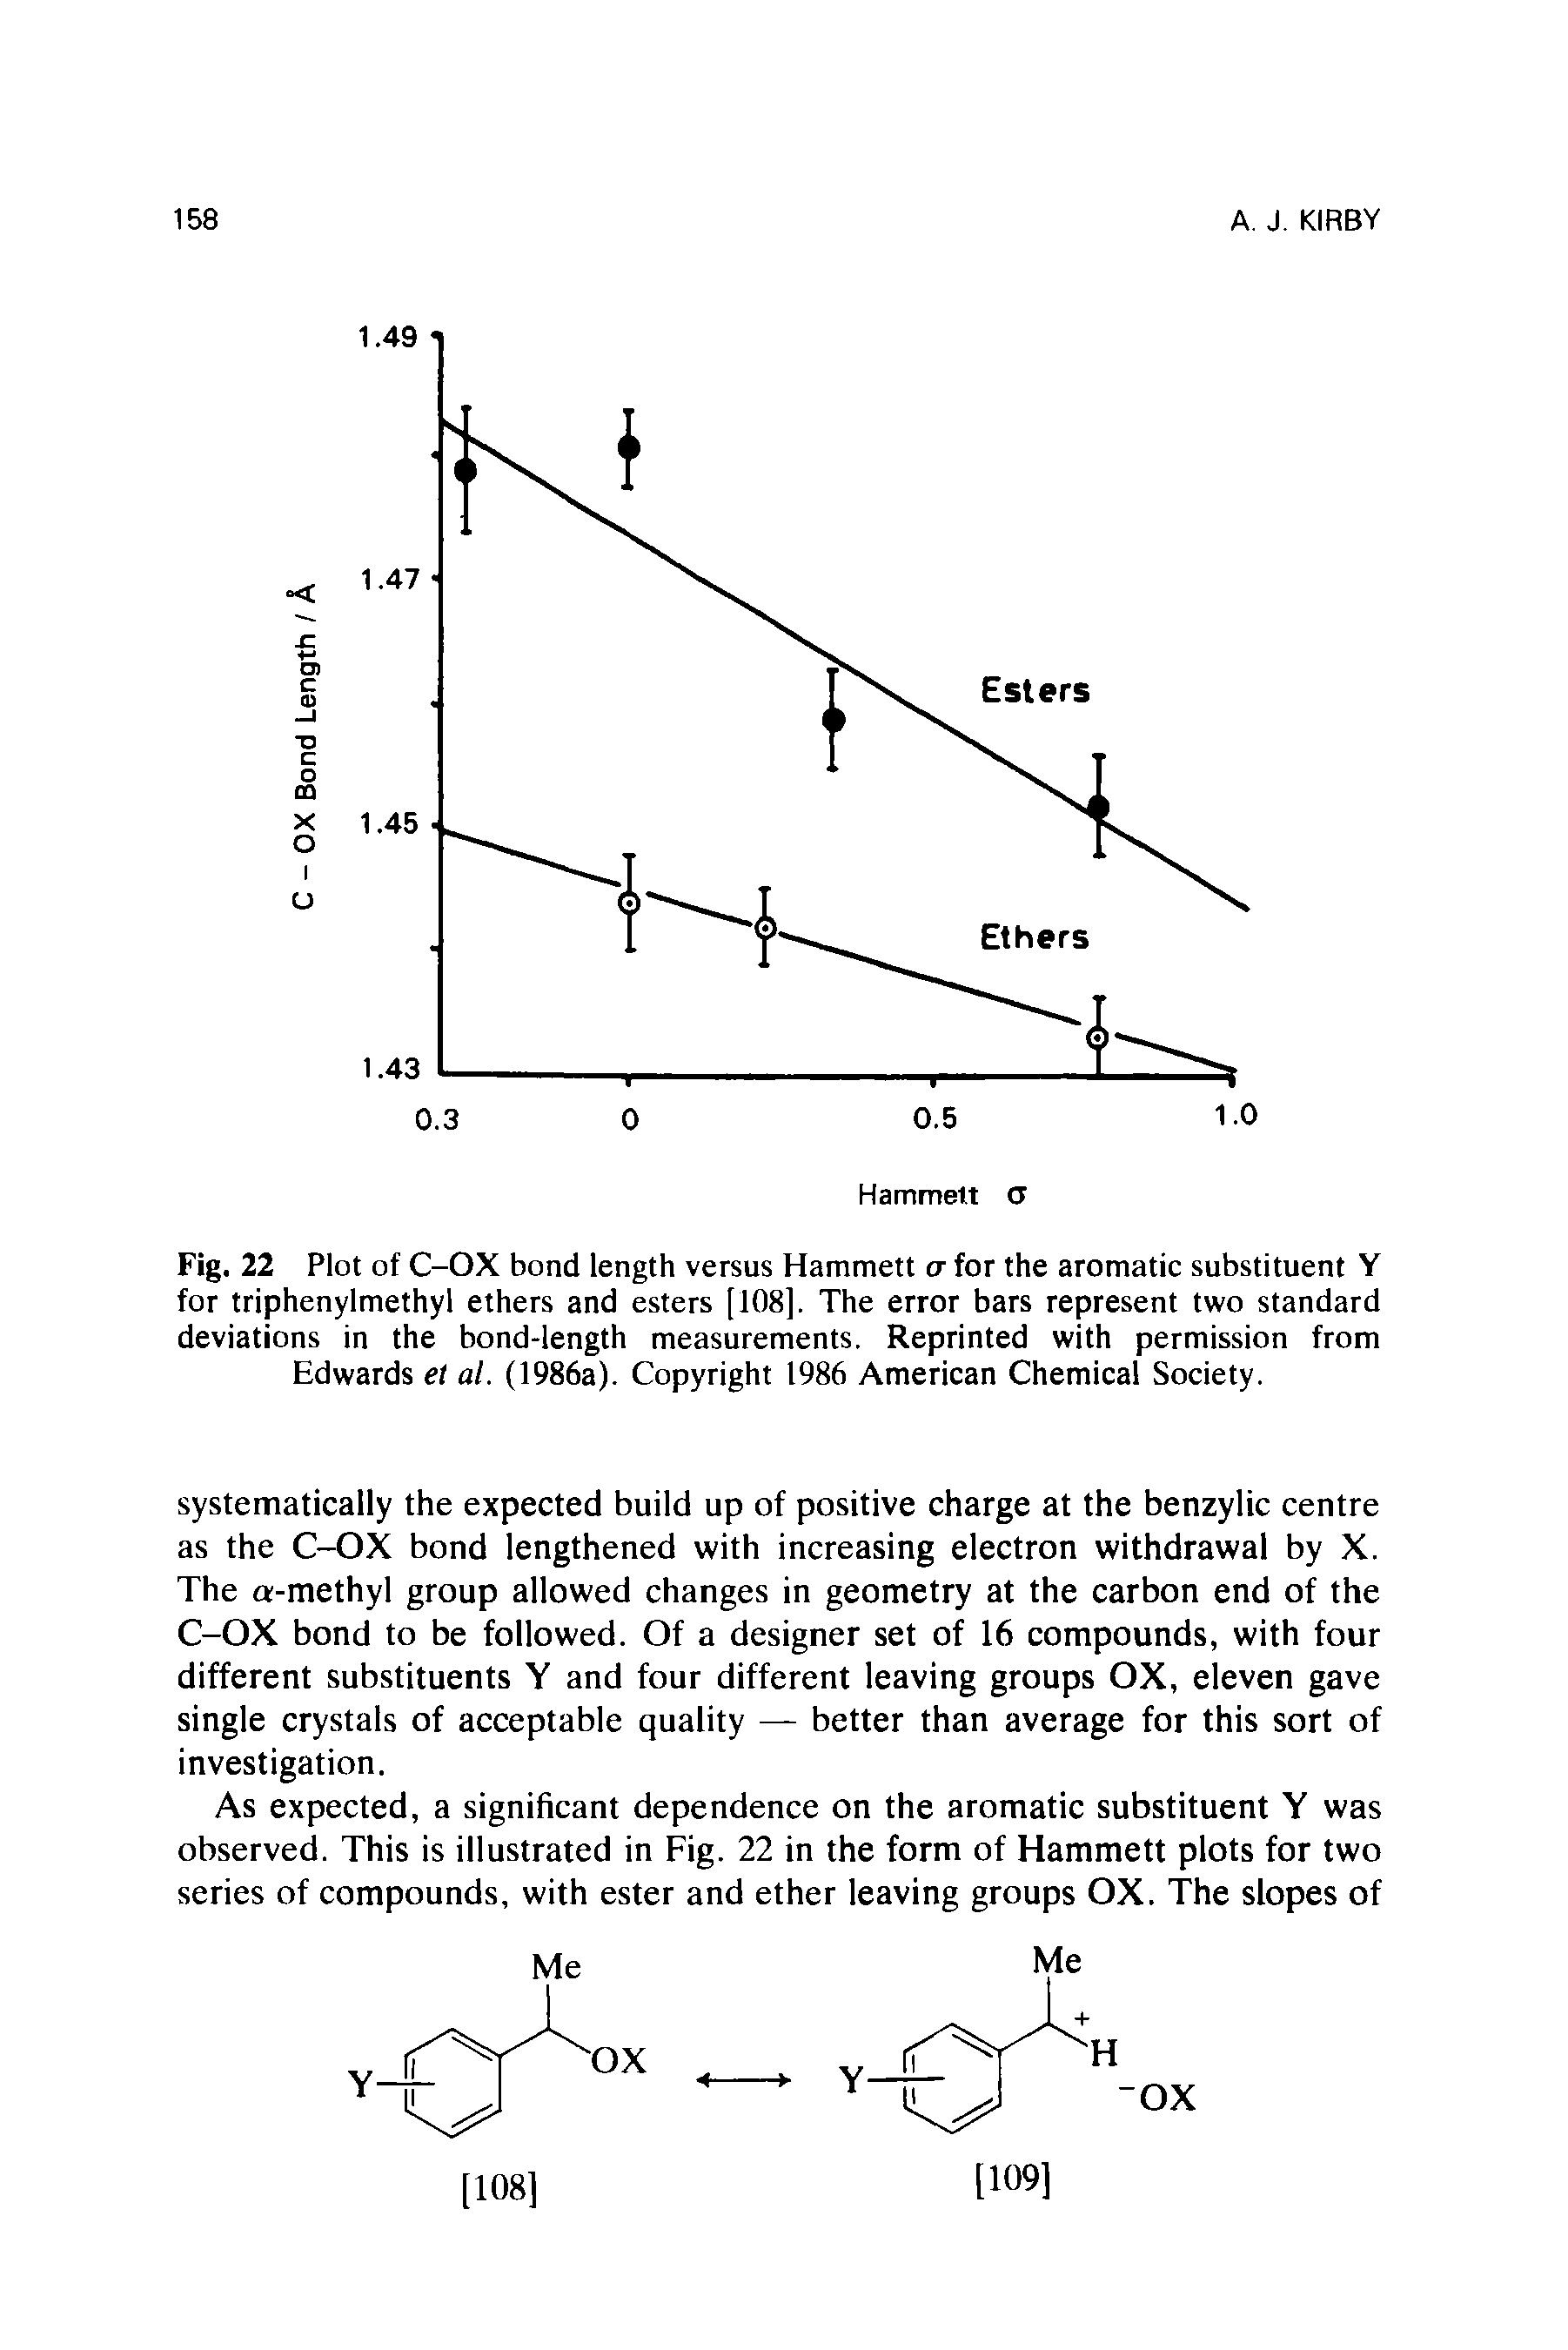 Fig. 22 Plot of C-OX bond length versus Hammett a for the aromatic substituent Y for triphenylmethyl ethers and esters [108]. The error bars represent two standard deviations in the bond-length measurements. Reprinted with permission from Edwards et al. (1986a). Copyright 1986 American Chemical Society.